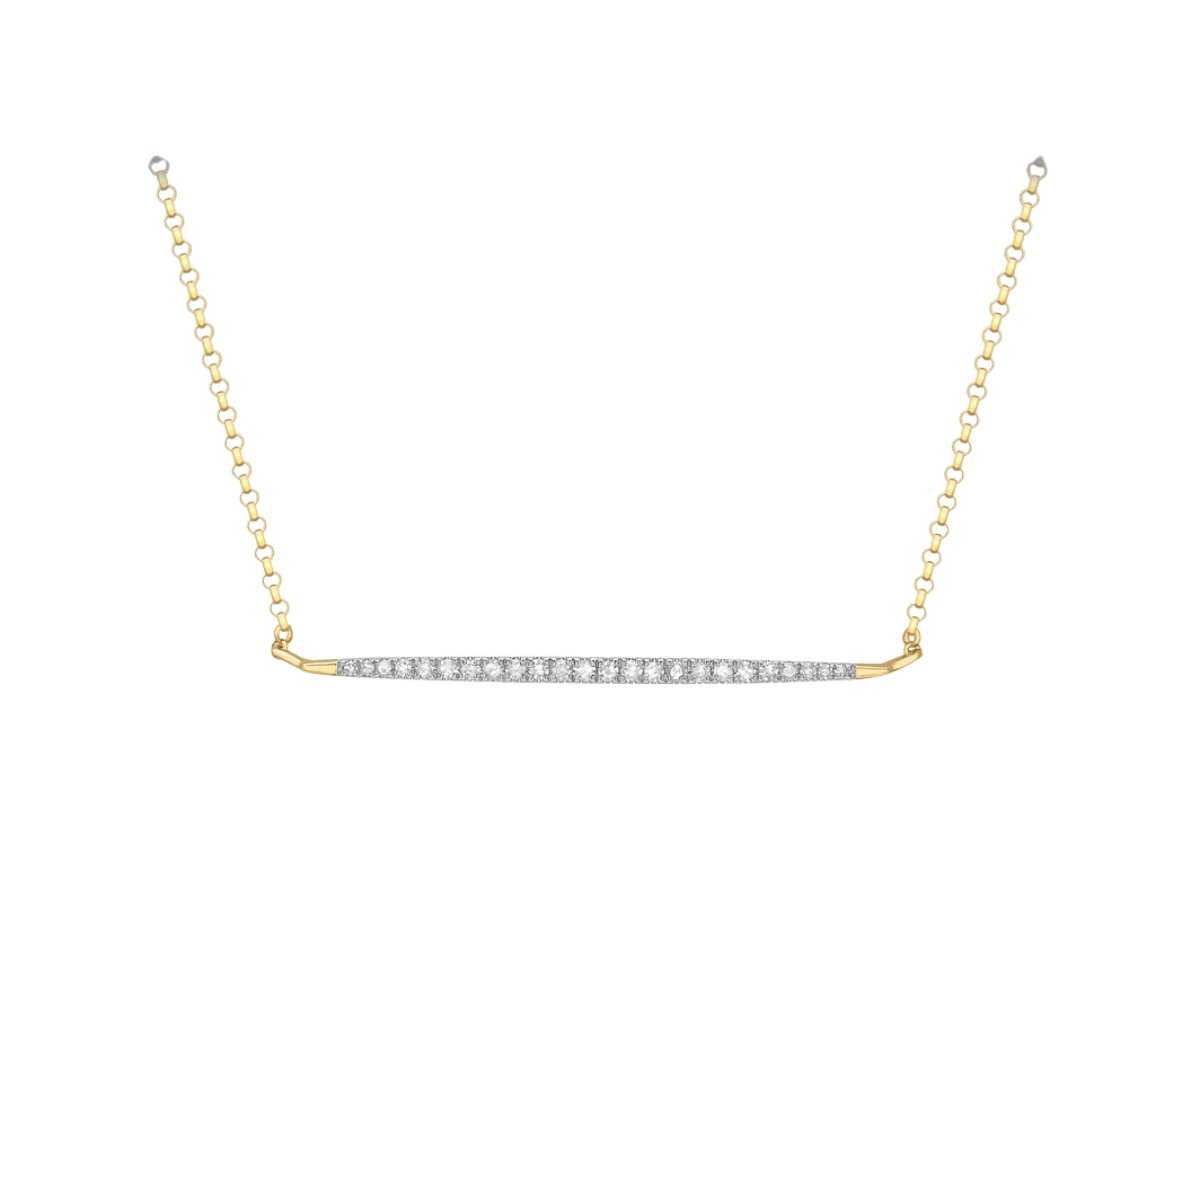 9 Carat Yellow Gold 0.15 Carat Diamond Bar Adjustable Necklace | Elegant and Timeless Design | Perfect for Layering or Wearing Alone - RubyJade